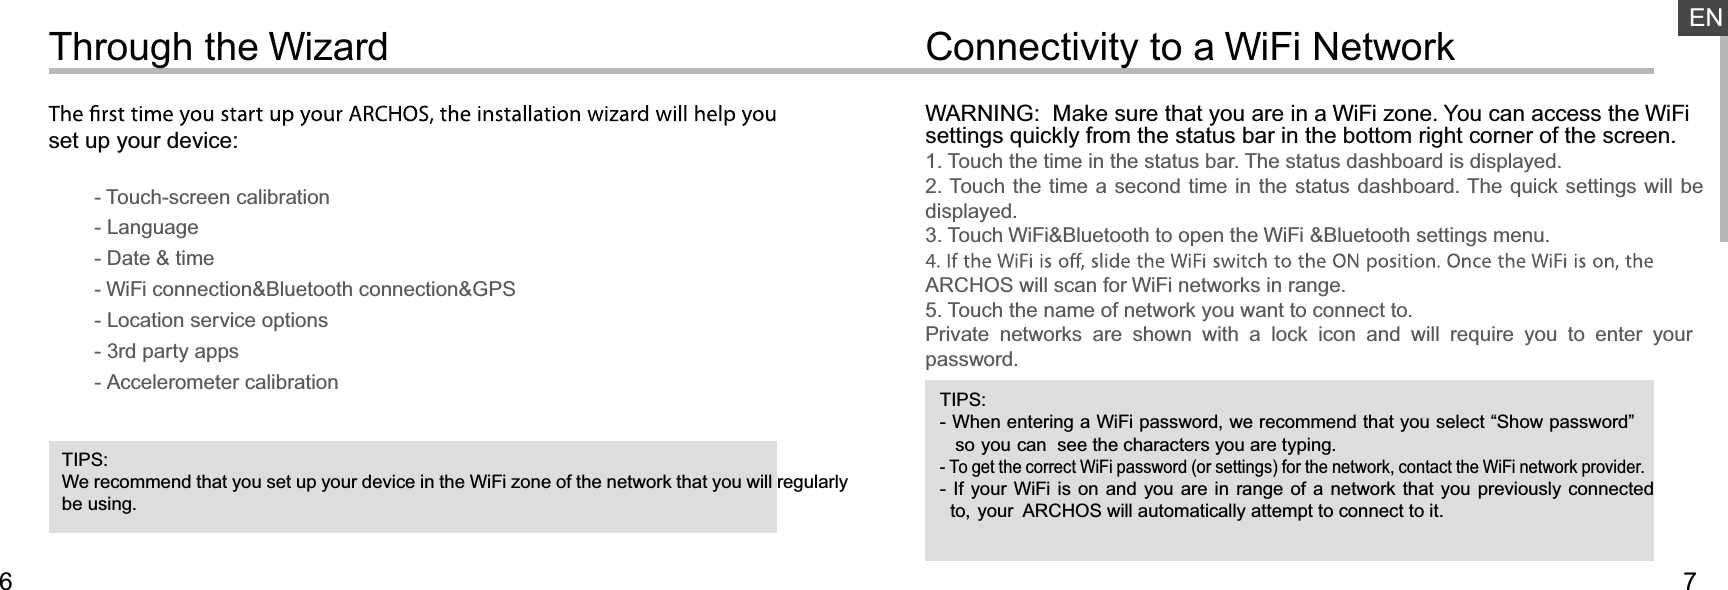 76ENConnectivity to a WiFi NetworkThrough the WizardTIPS:We recommend that you set up your device in the WiFi zone of the network that you will regularly be using.TIPS:- When entering a WiFi password, we recommend that you select “Show password”    so you can  see the characters you are typing.- To get the correct WiFi password (or settings) for the network, contact the WiFi network provider.- If your WiFi is on and you are in range of a network that you previously connected   to, your  ARCHOS will automatically attempt to connect to it.WARNING:  Make sure that you are in a WiFi zone. You can access the WiFi settings quickly from the status bar in the bottom right corner of the screen.1. Touch the time in the status bar. The status dashboard is displayed.2. Touch the time a second time in the status dashboard. The quick settings will be displayed.3. Touch WiFi&amp;Bluetooth to open the WiFi &amp;Bluetooth settings menu.ARCHOS will scan for WiFi networks in range.5. Touch the name of network you want to connect to.Private networks are shown with a lock icon and will require you to enter your password.set up your device:        - Touch-screen calibration        - Language        - Date &amp; time        - WiFi connection&amp;Bluetooth connection&amp;GPS         - Location service options        - 3rd party apps        - Accelerometer calibration